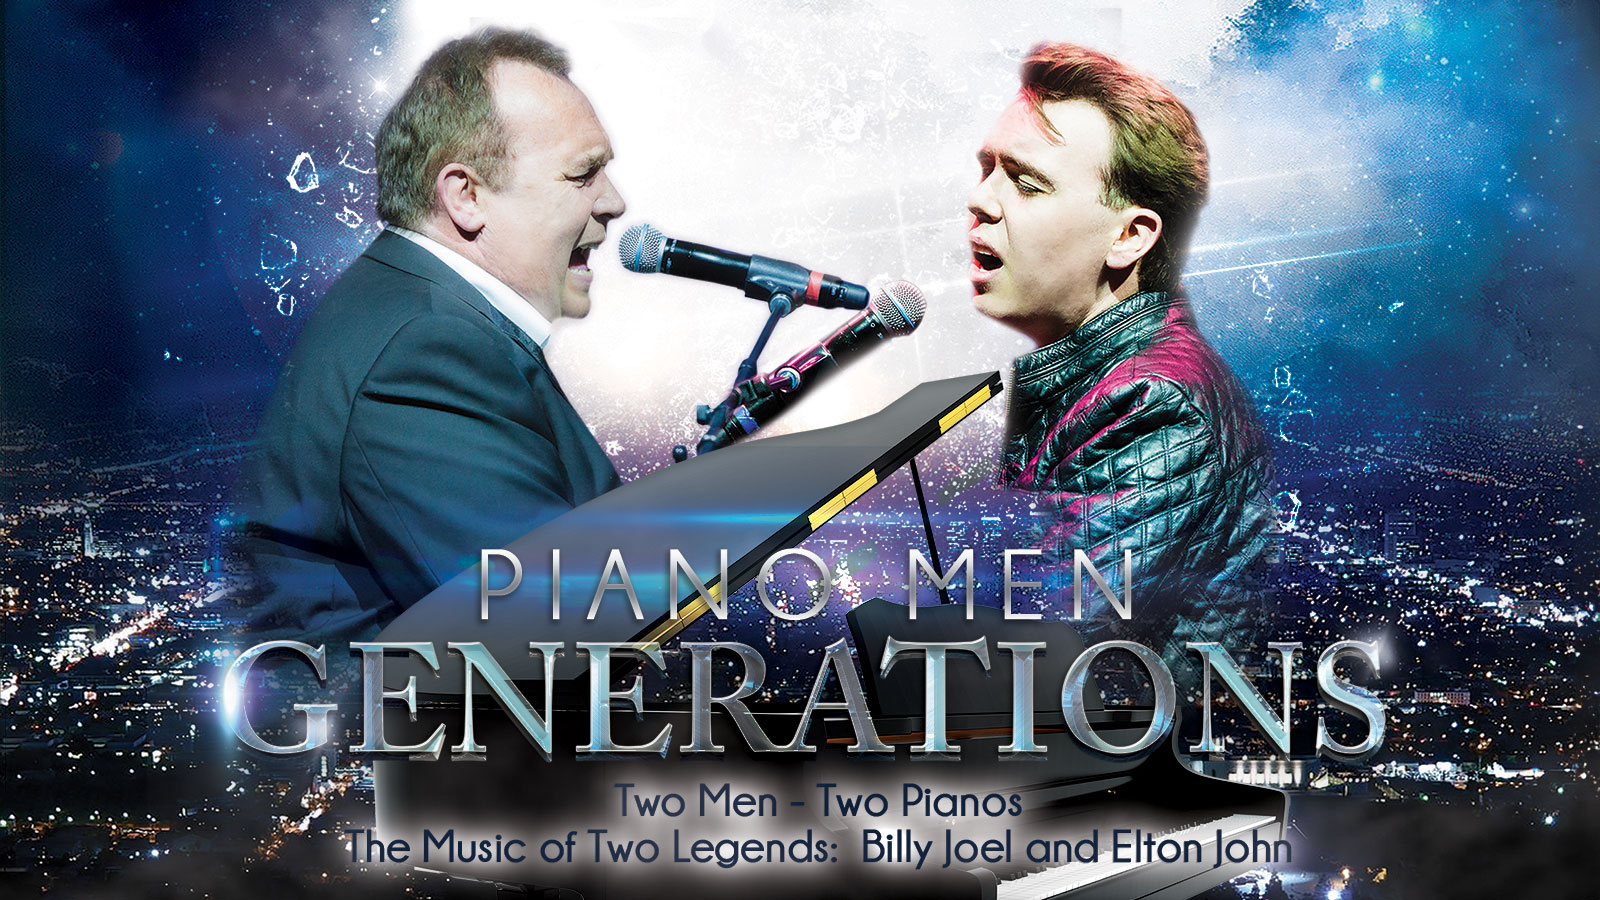 Piano Men: Generations - two singers sit across from each other playing piano